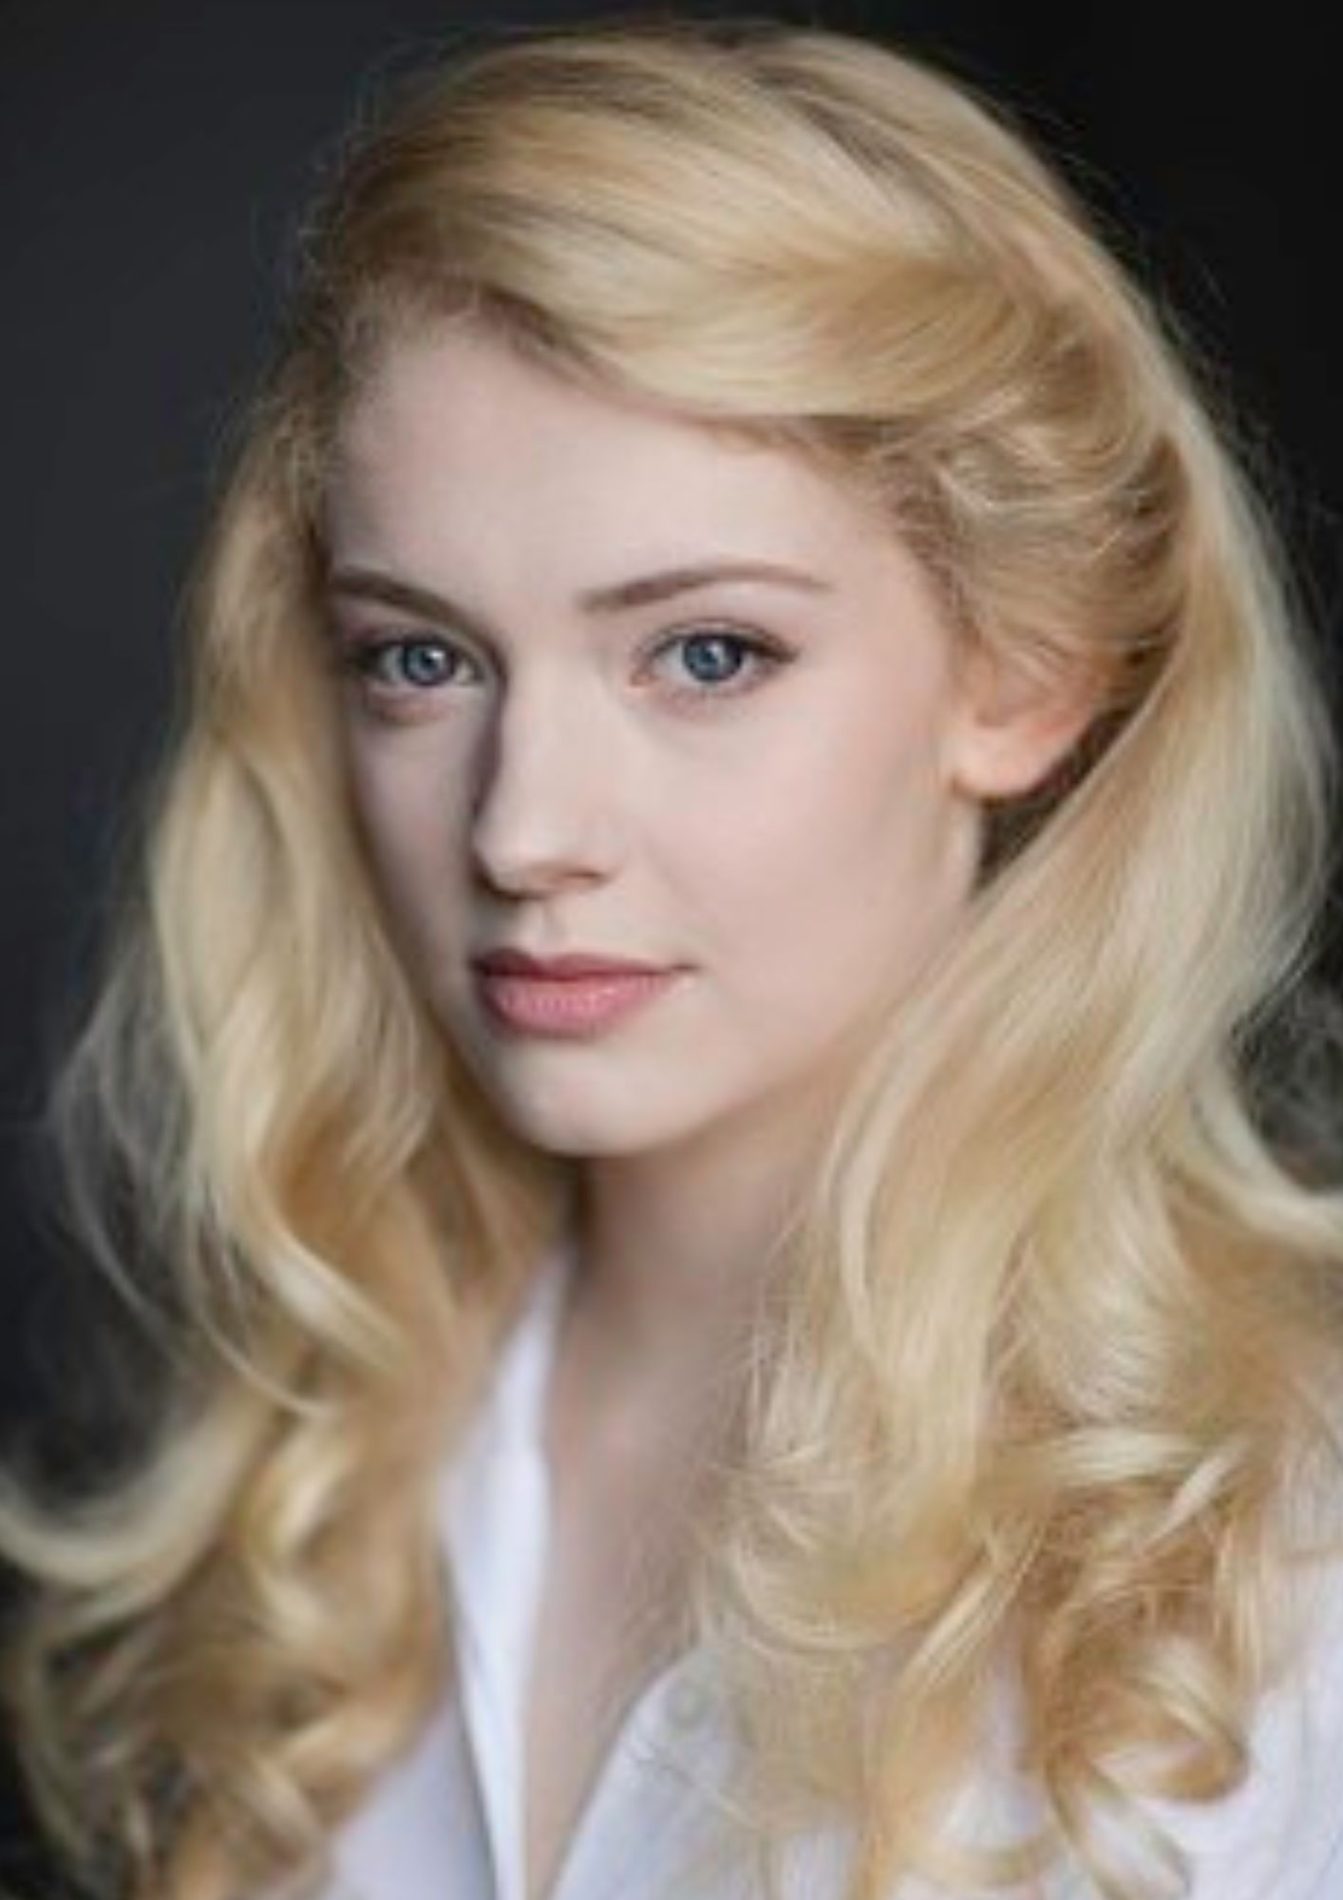 Lily Sacofsky's headshot: She wears a white button up shirt and has blond hair that is styled in curls.